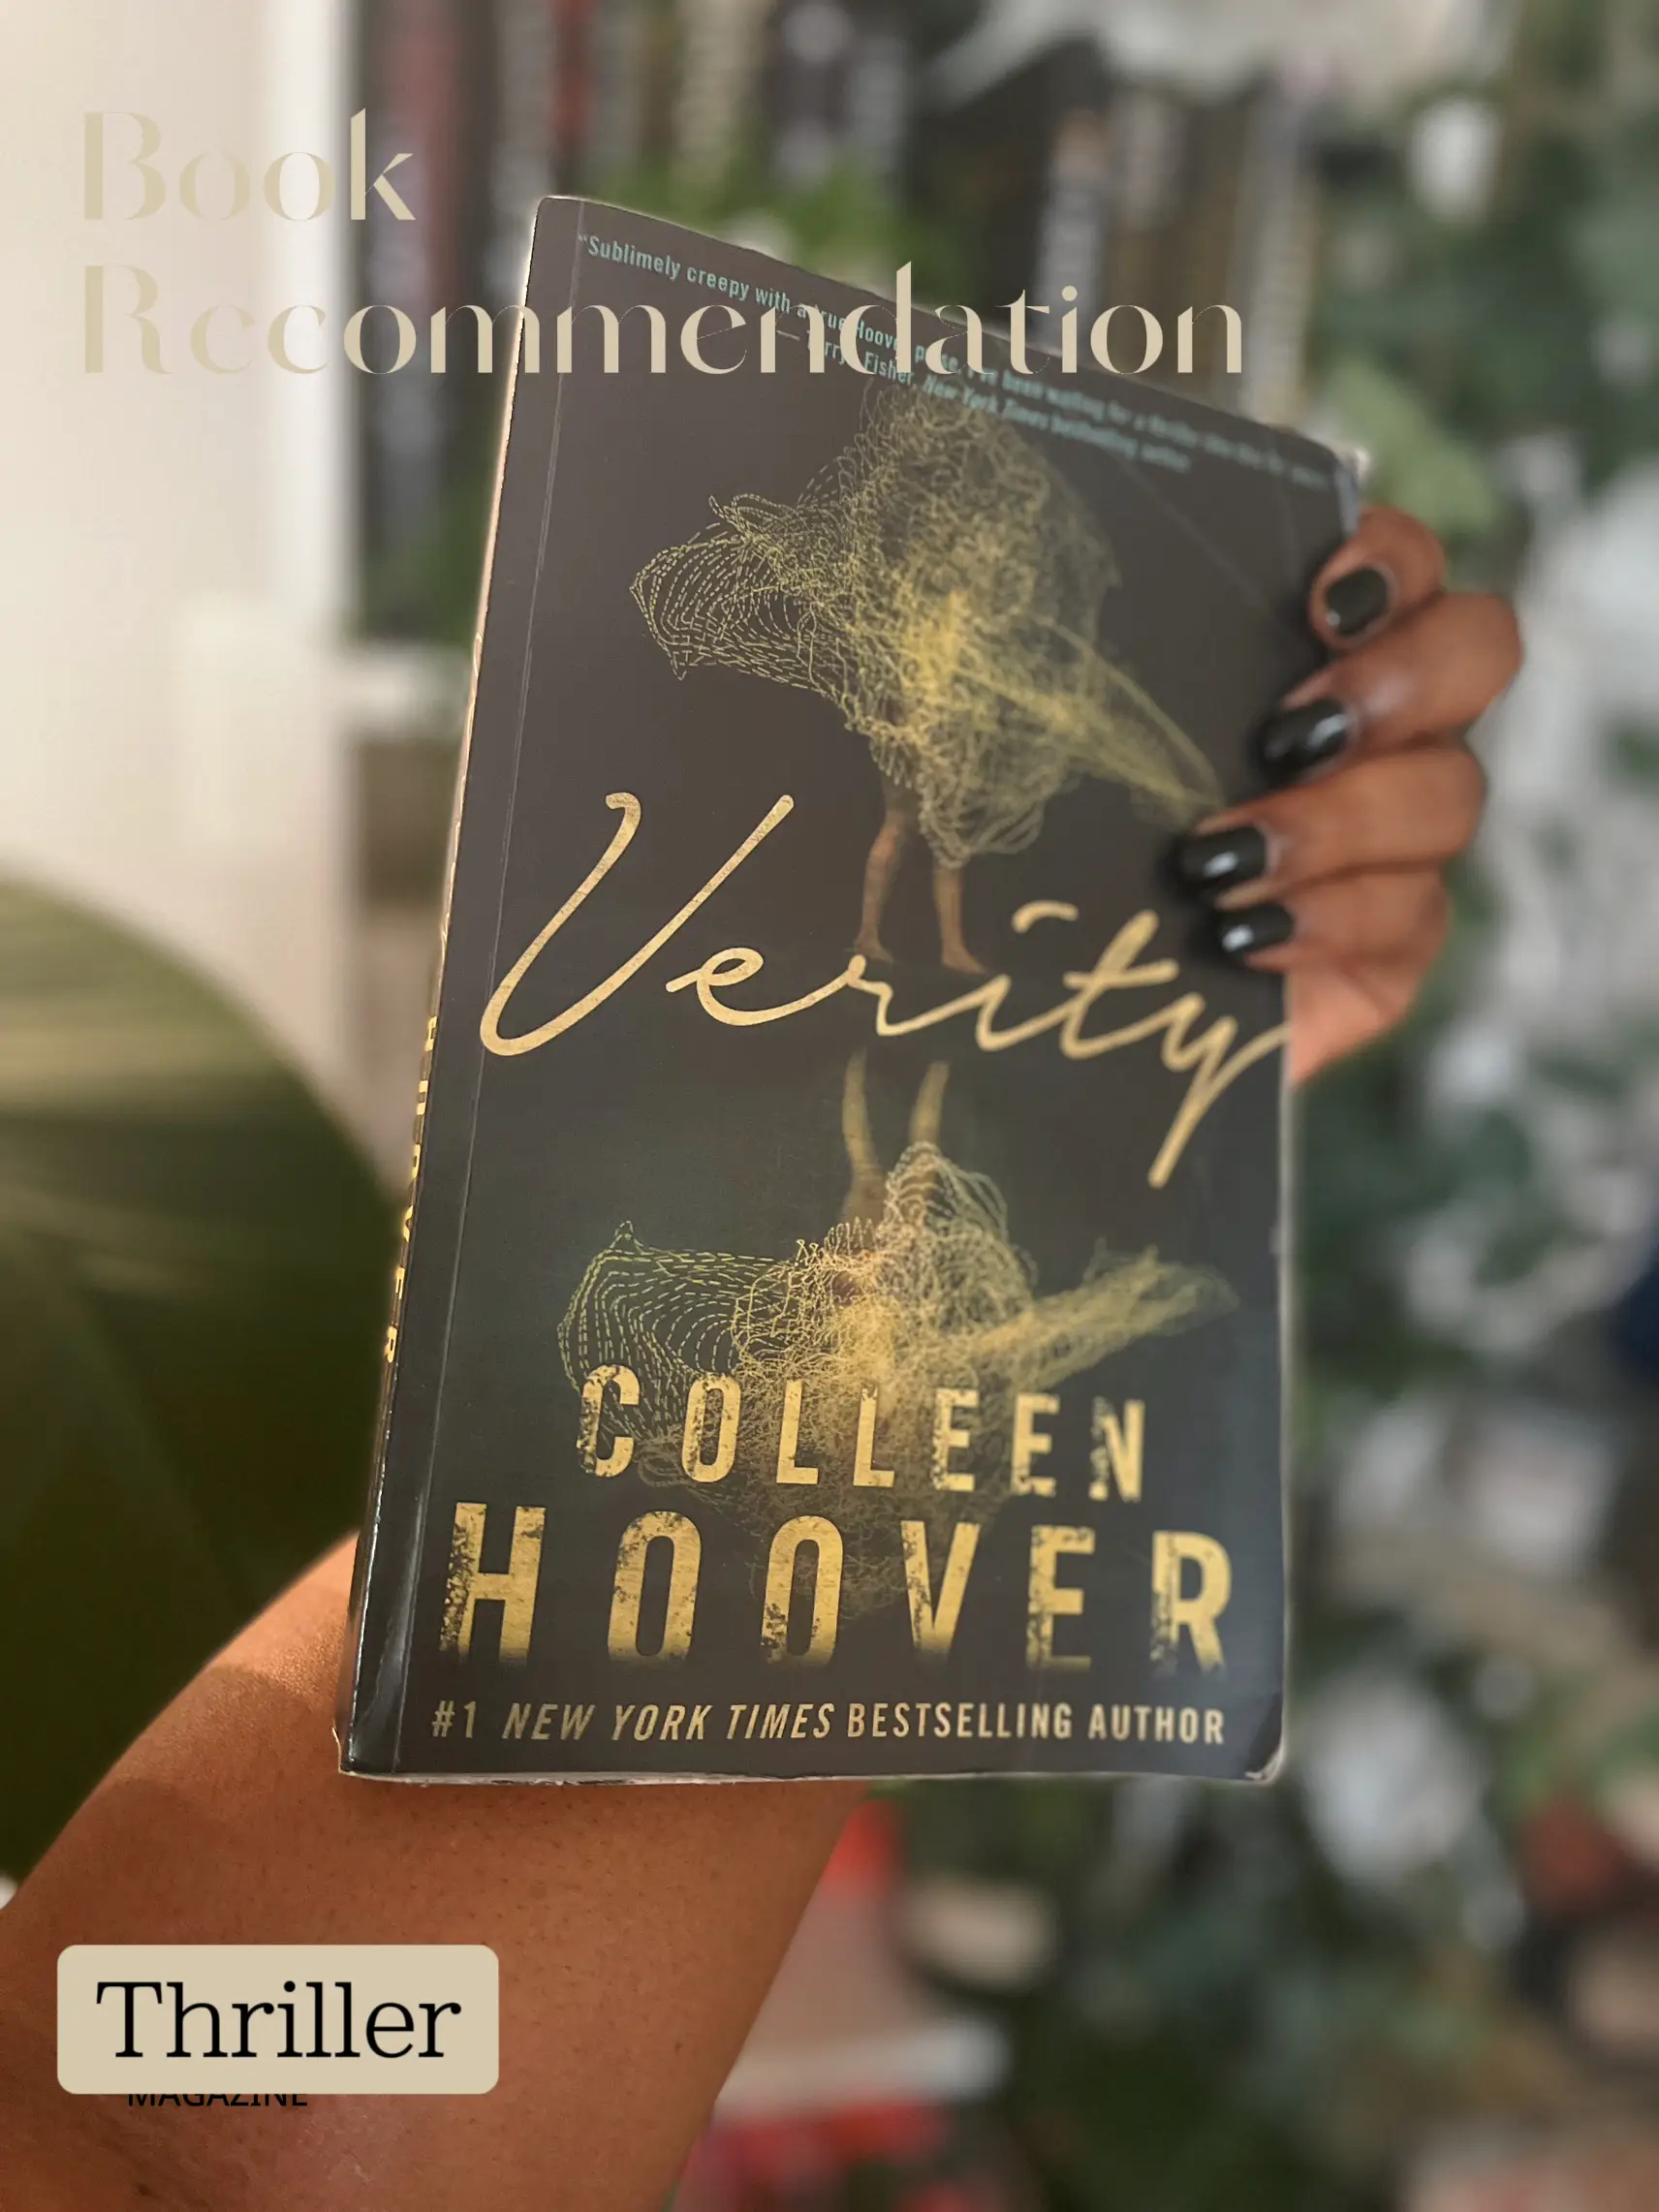 Verity by Colleen Hoover - Be Your Google